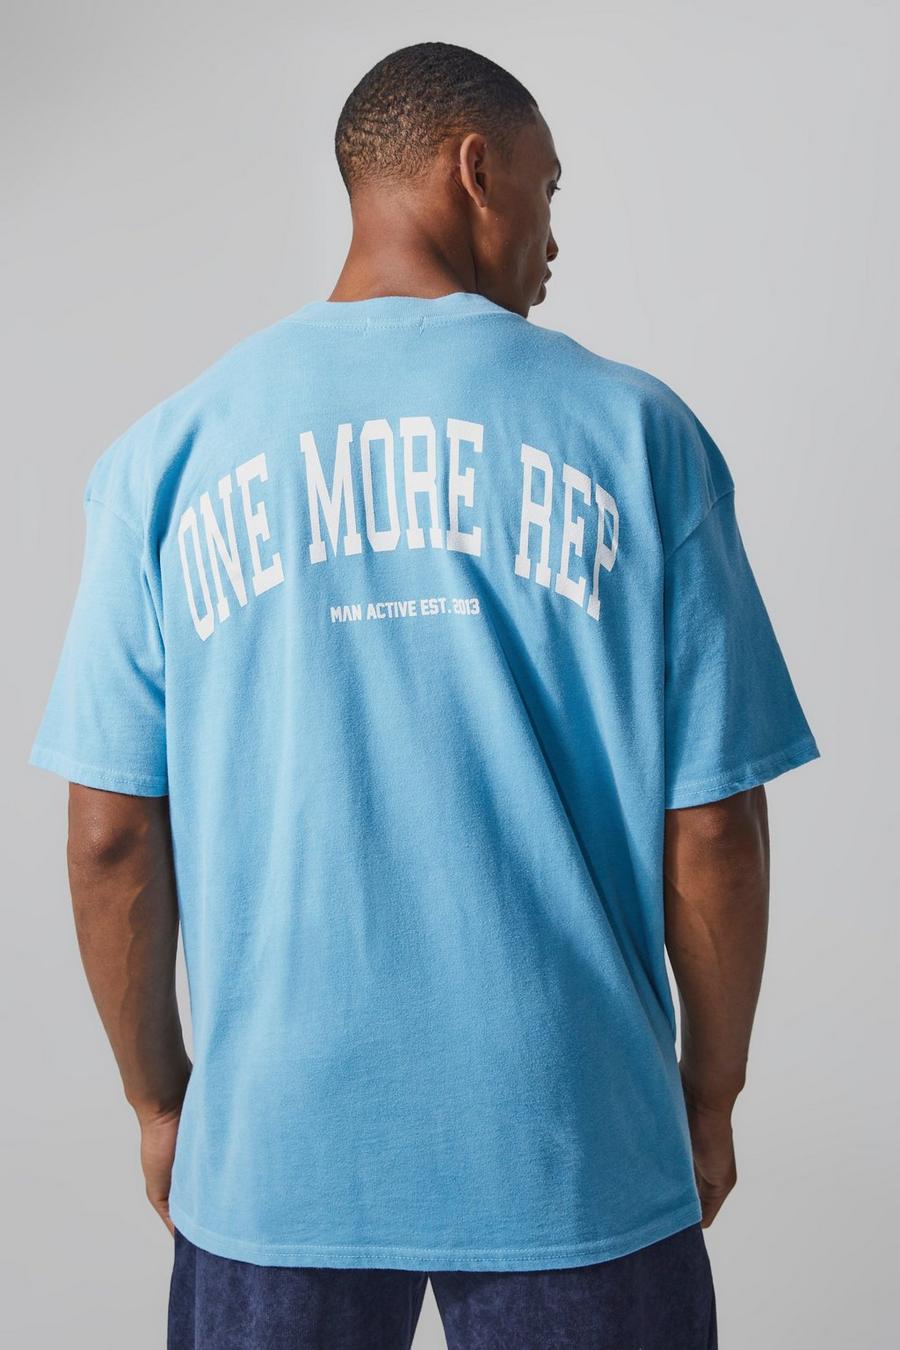 Teal Man Active Oversized Overdye Rep T-shirt image number 1